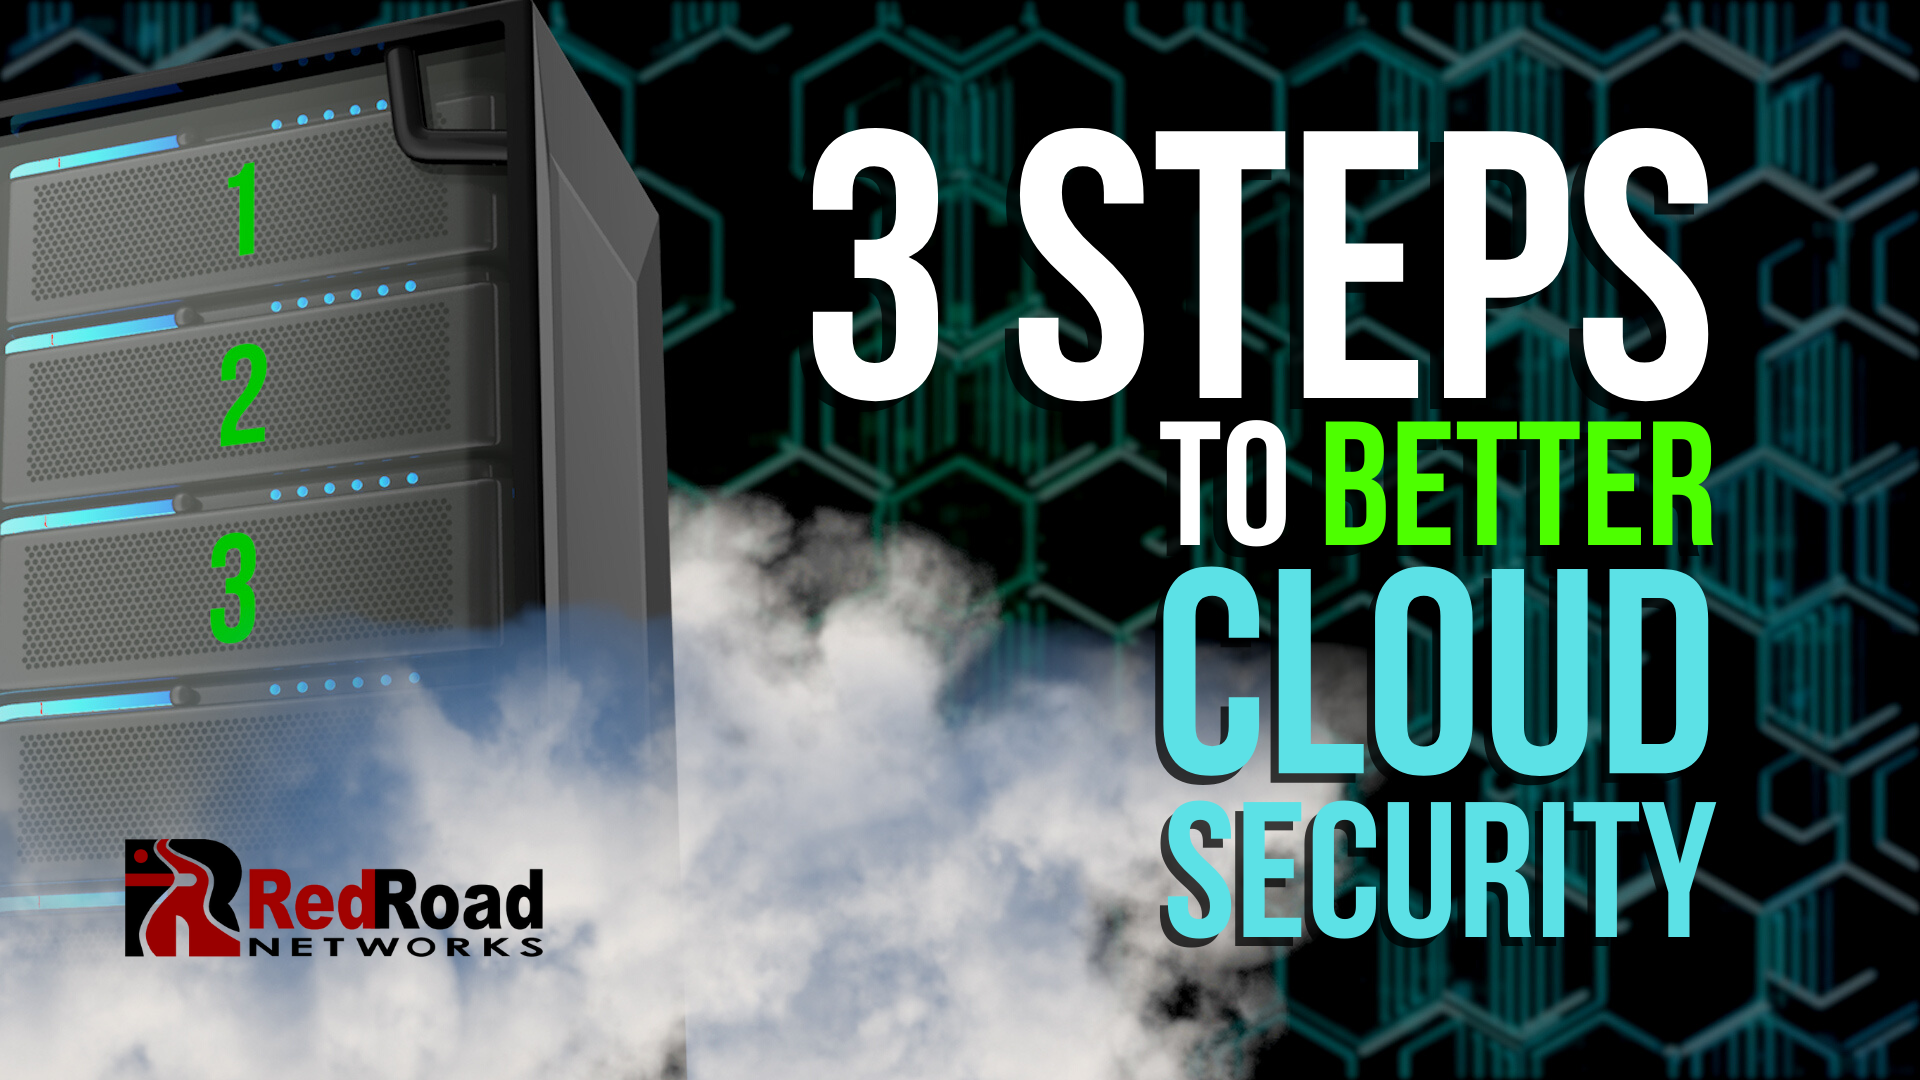 3 steps to better cloud security